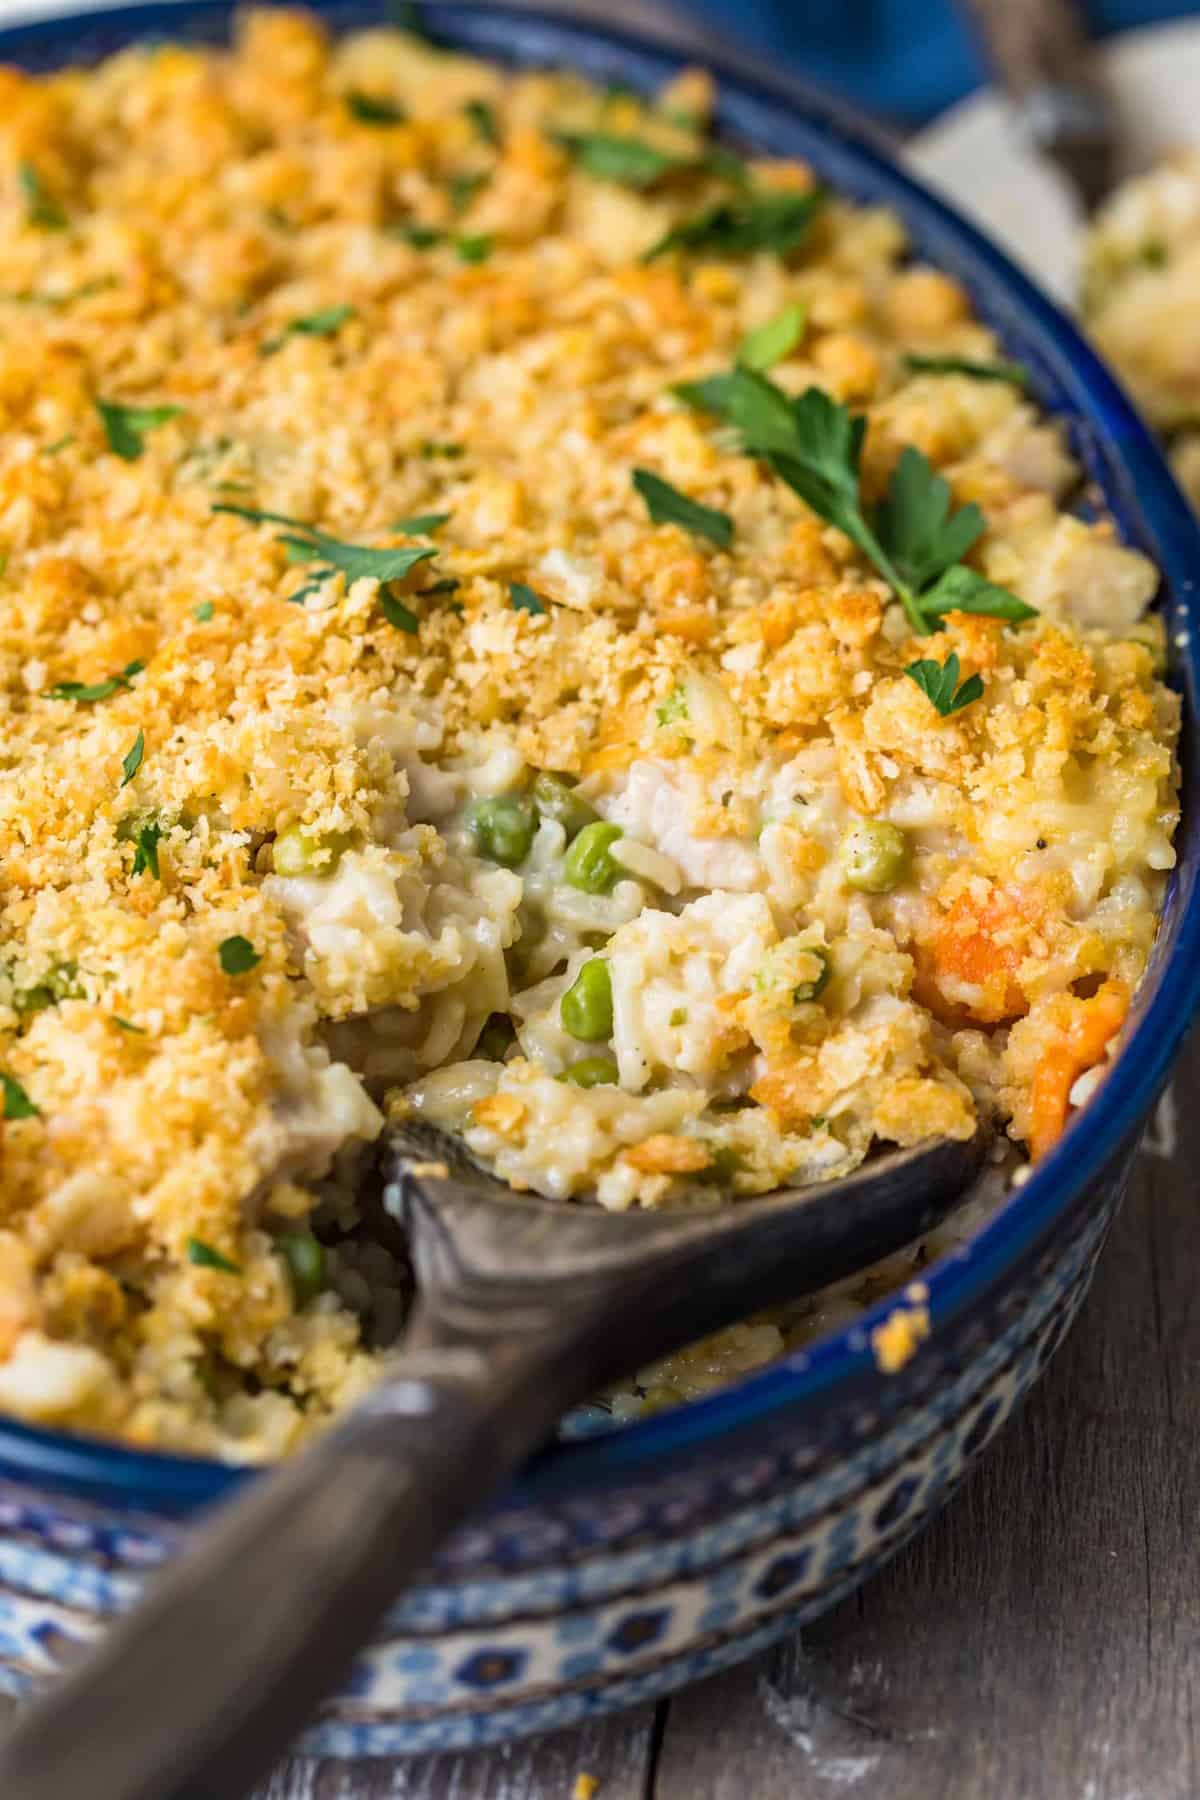 Turkey Rice Casserole in a blue casserole dish with a wooden spoon